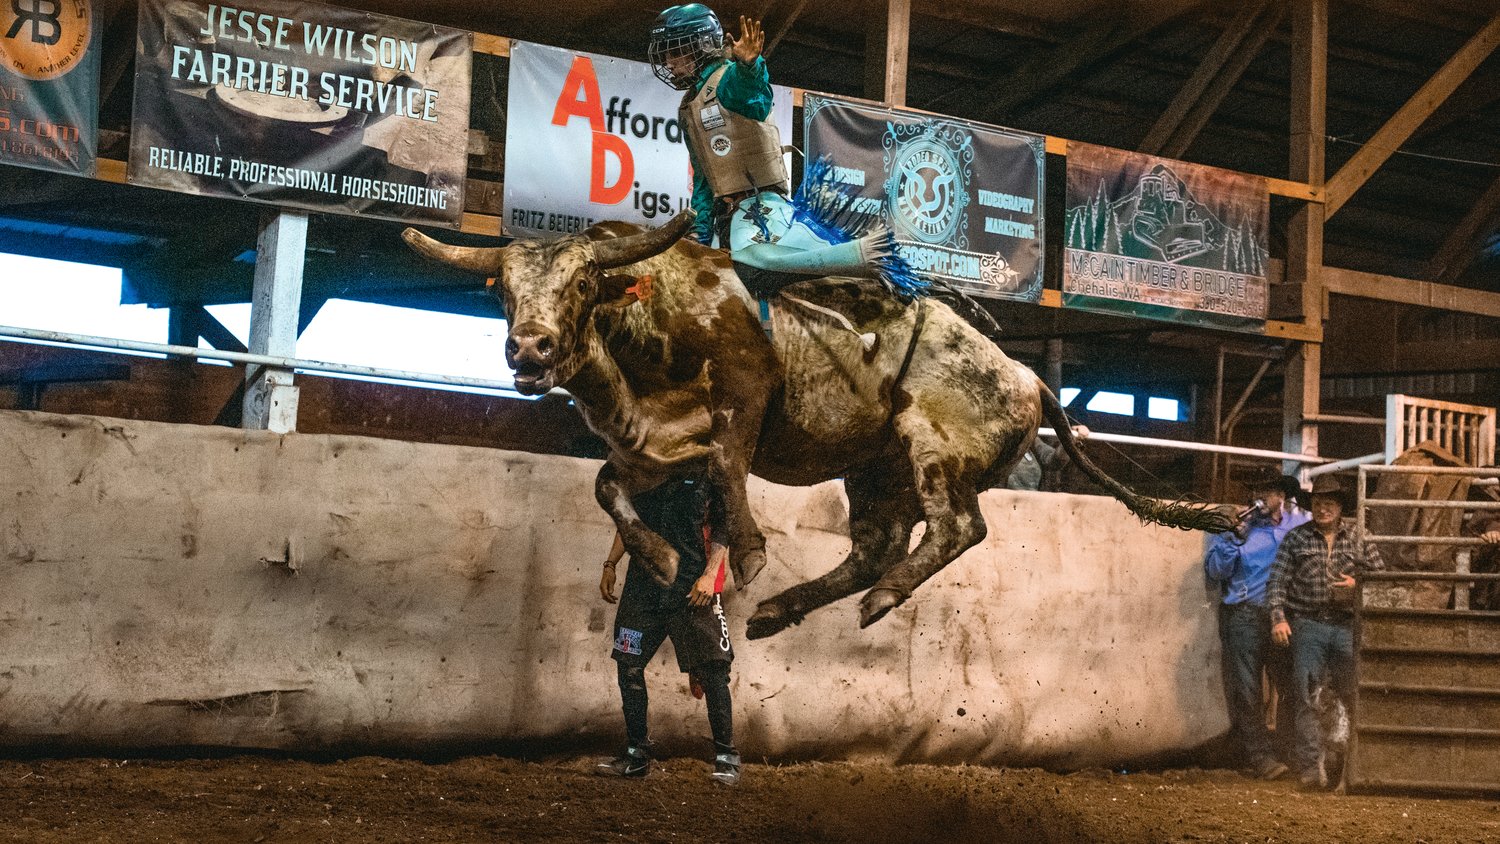 A rider is thrusted into the air by a leaping bull at a Lazy HK Bar Rodeo Winter Series event Saturday in Silver Creek.